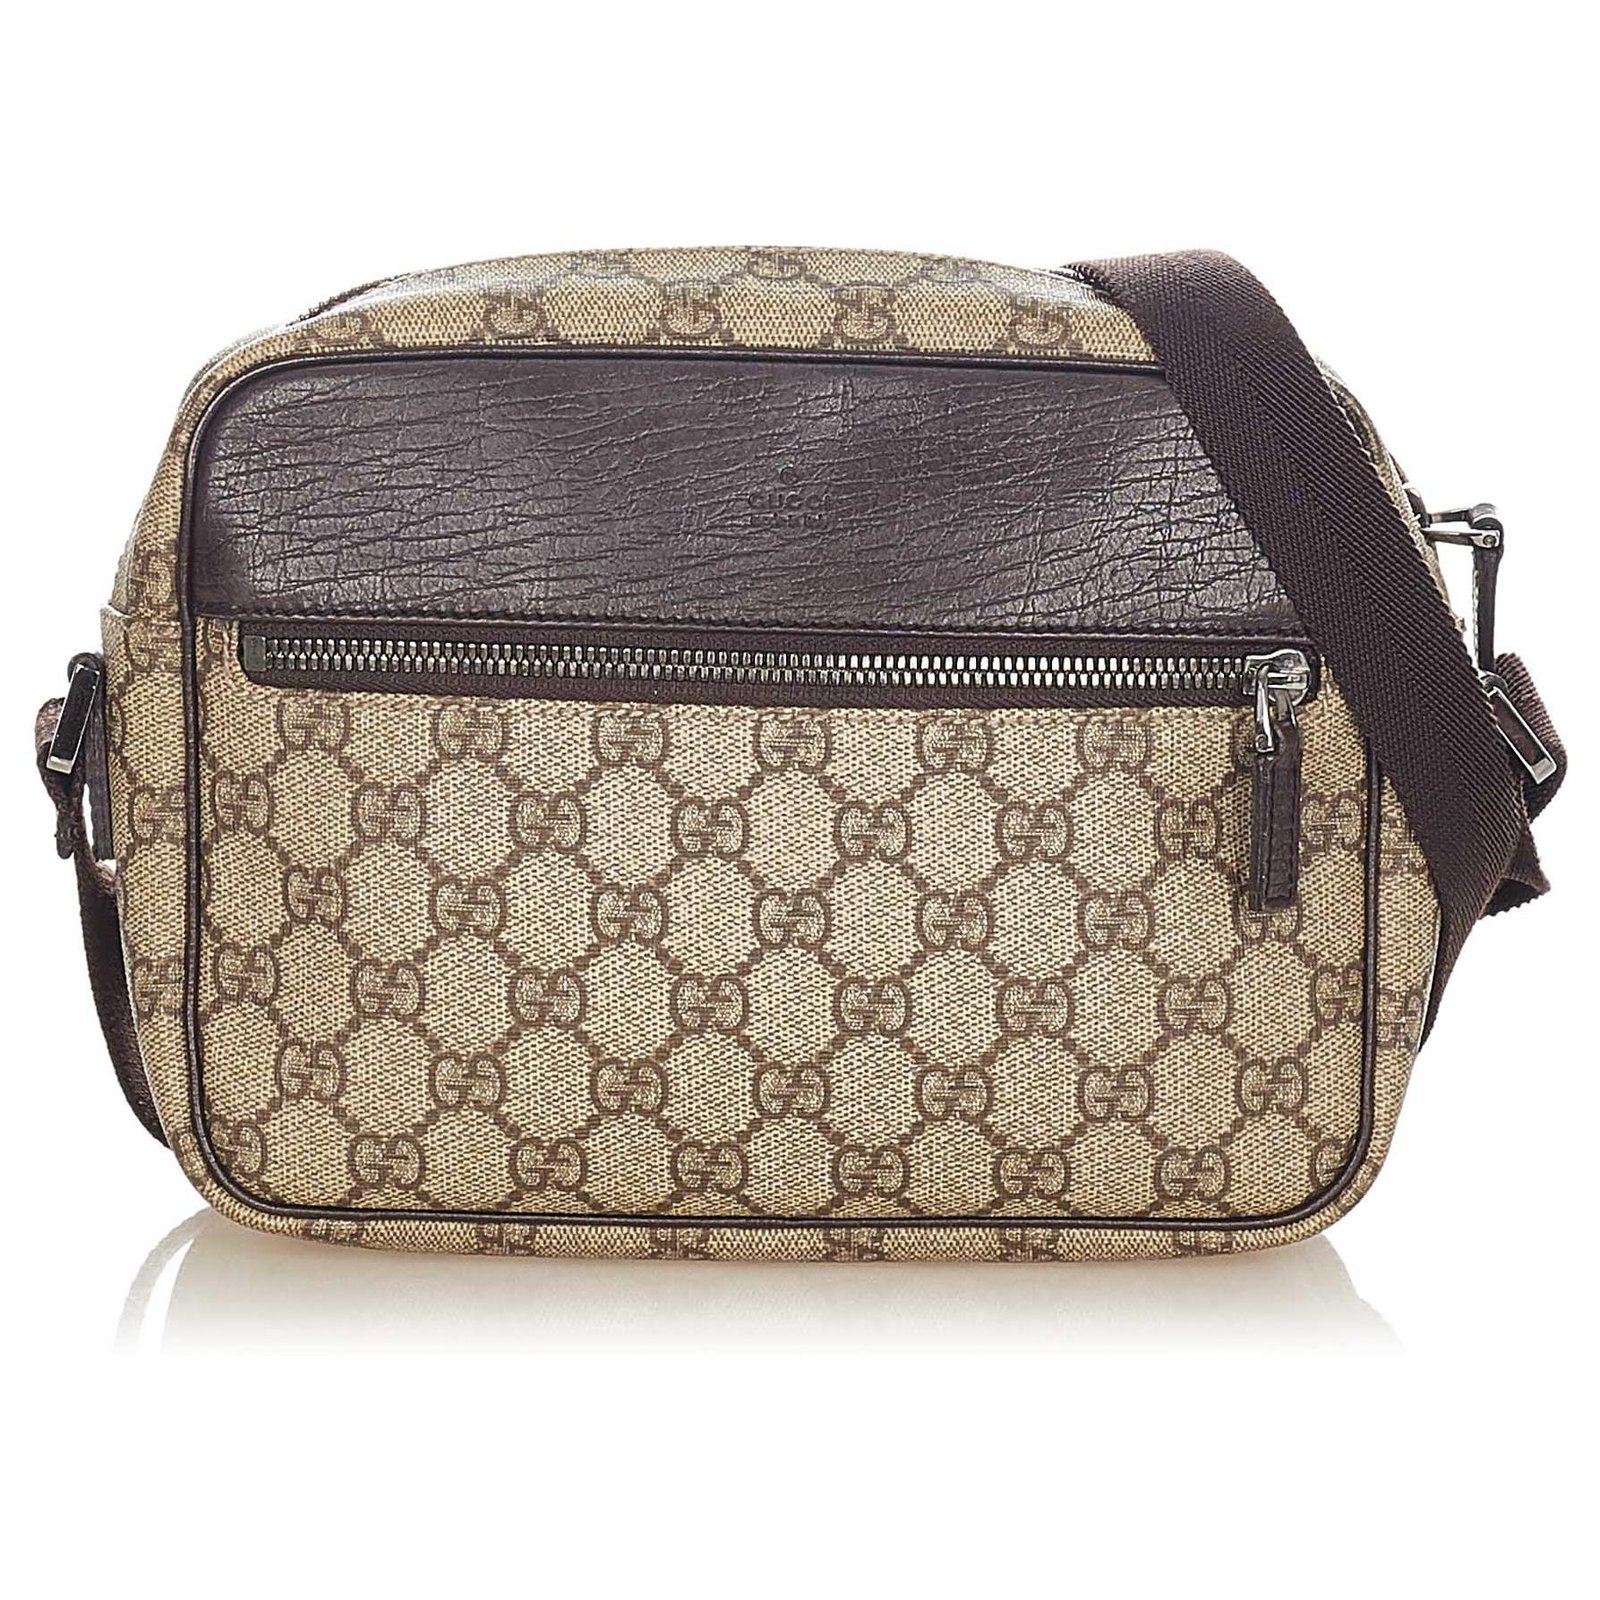 Beige GG Supreme canvas and leather cross-body bag, Gucci